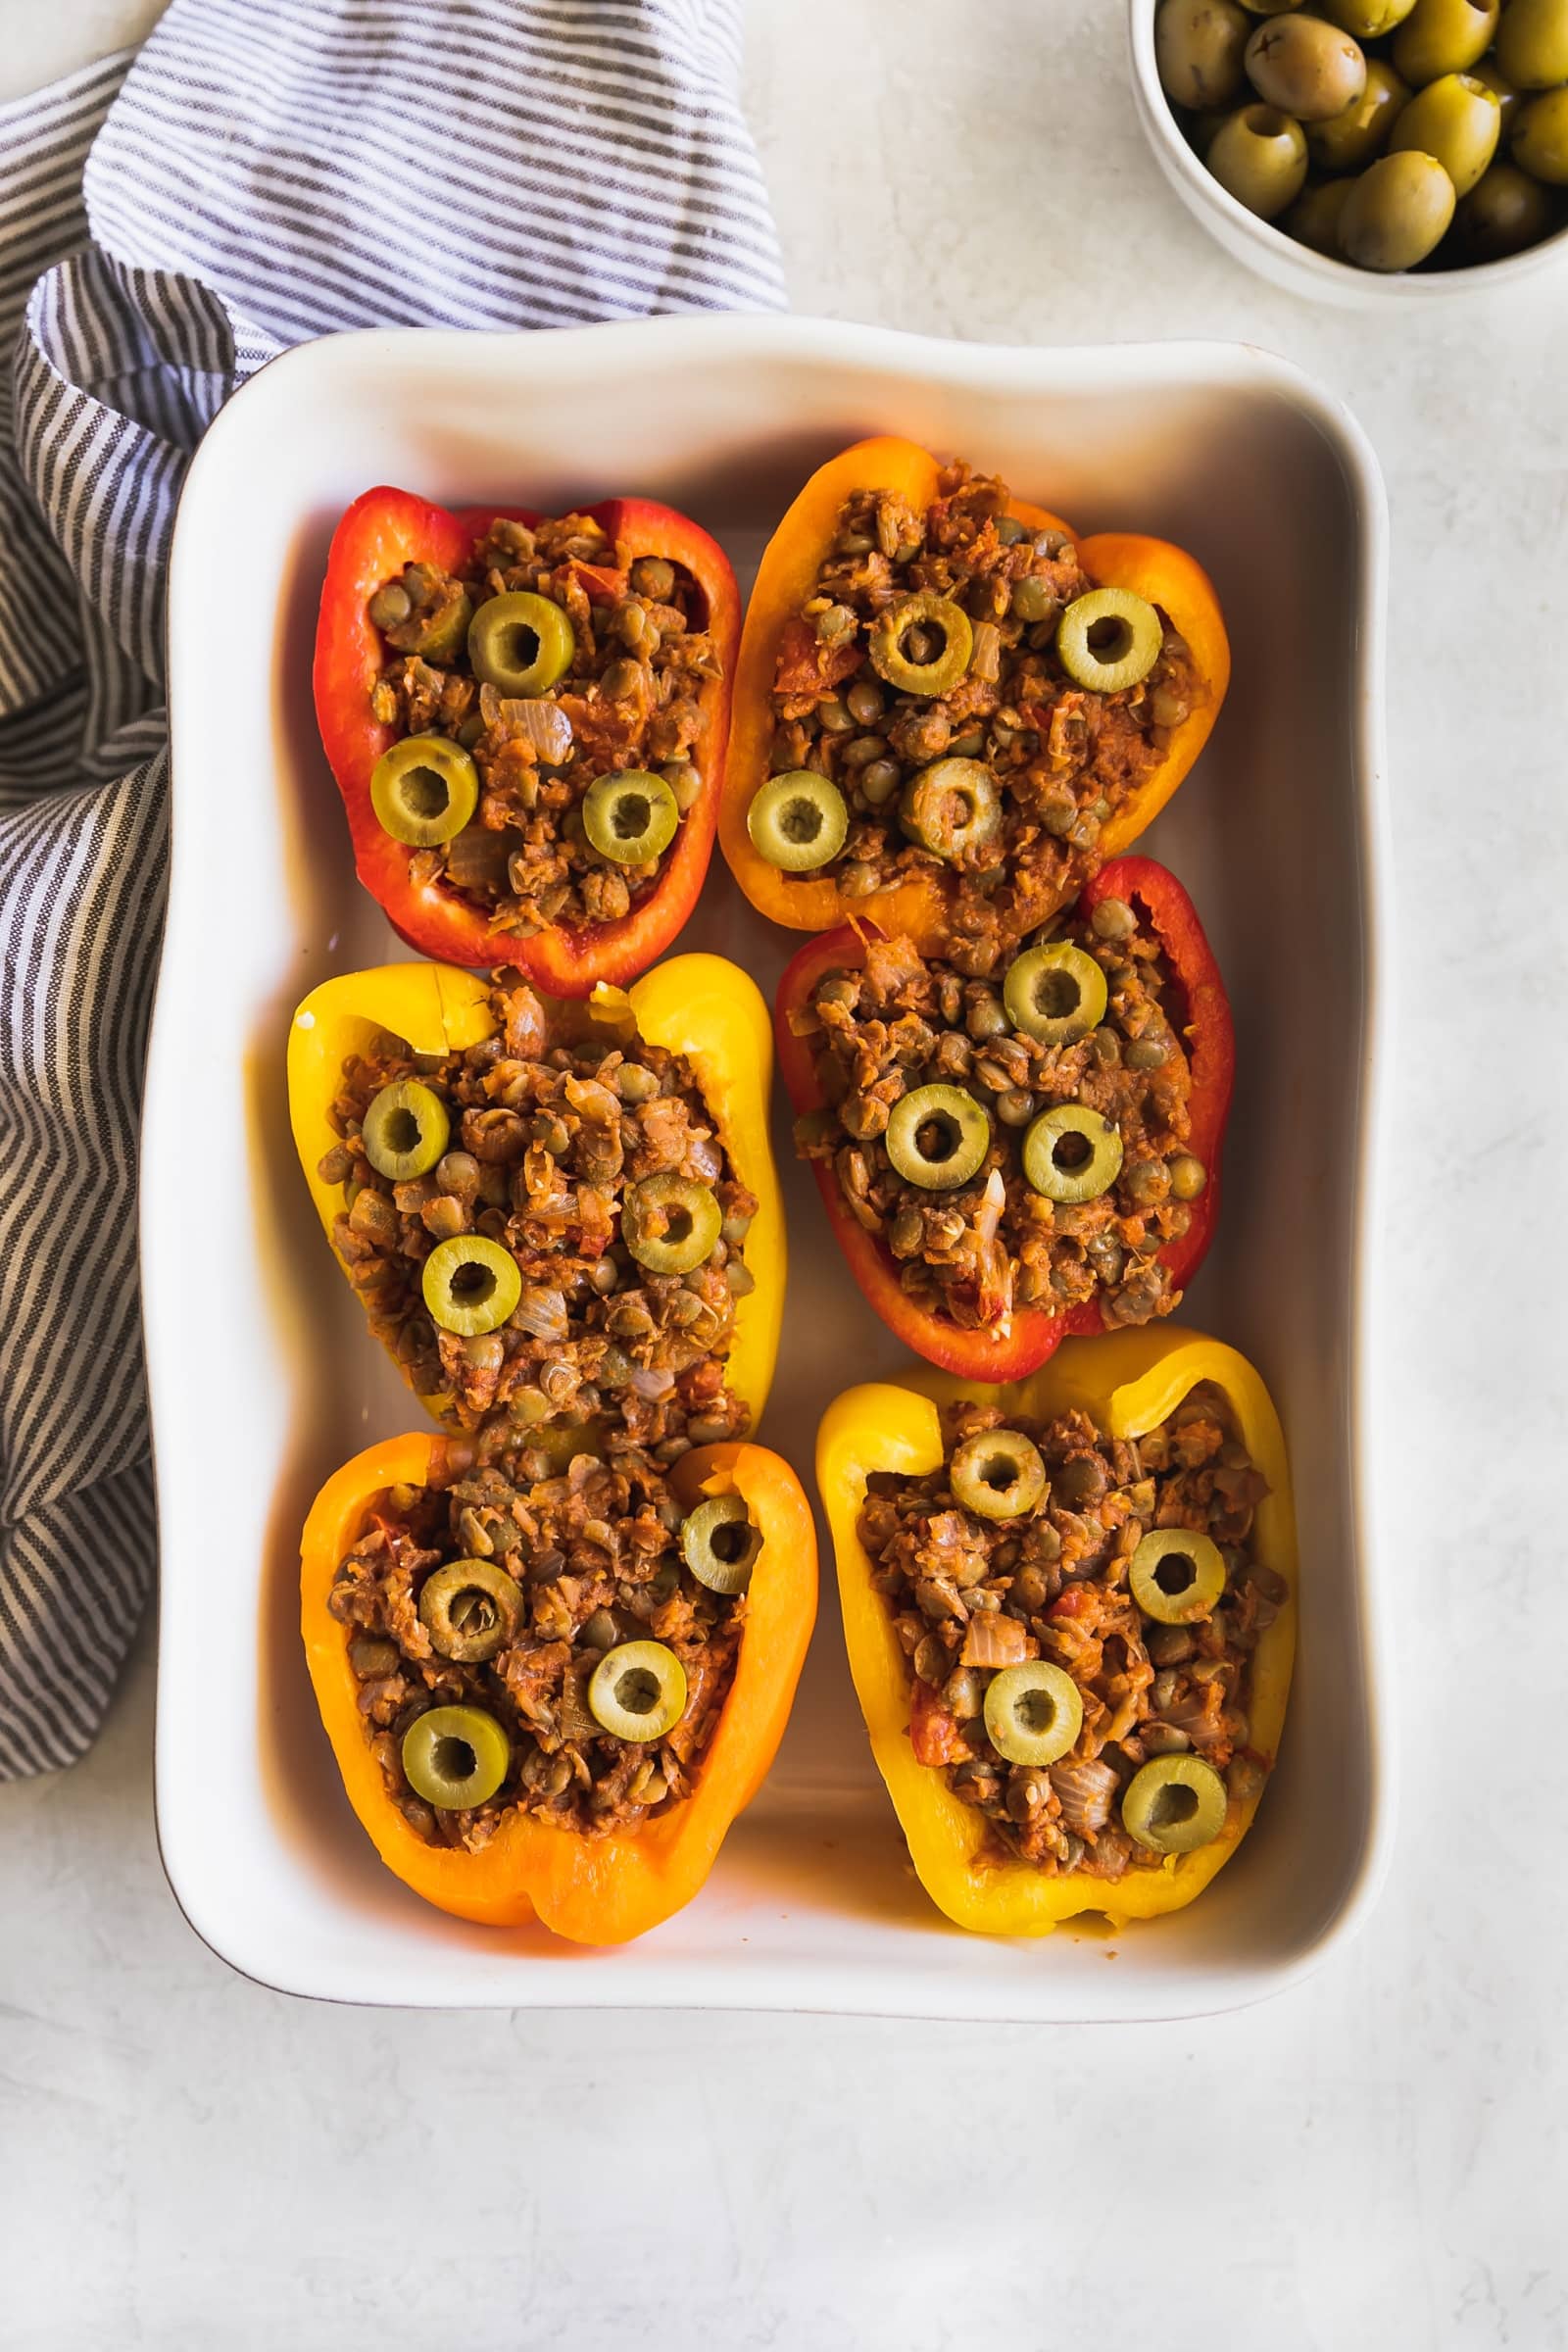 Cuban-Style Vegan Picadillo Stuffed Peppers. This vegan picadillo is a plant-based meal made Cuban-style with lentils, spices, onions, garlic, tomatoes, olives then stuffed in bell peppers. Perfect weeknight dinner!